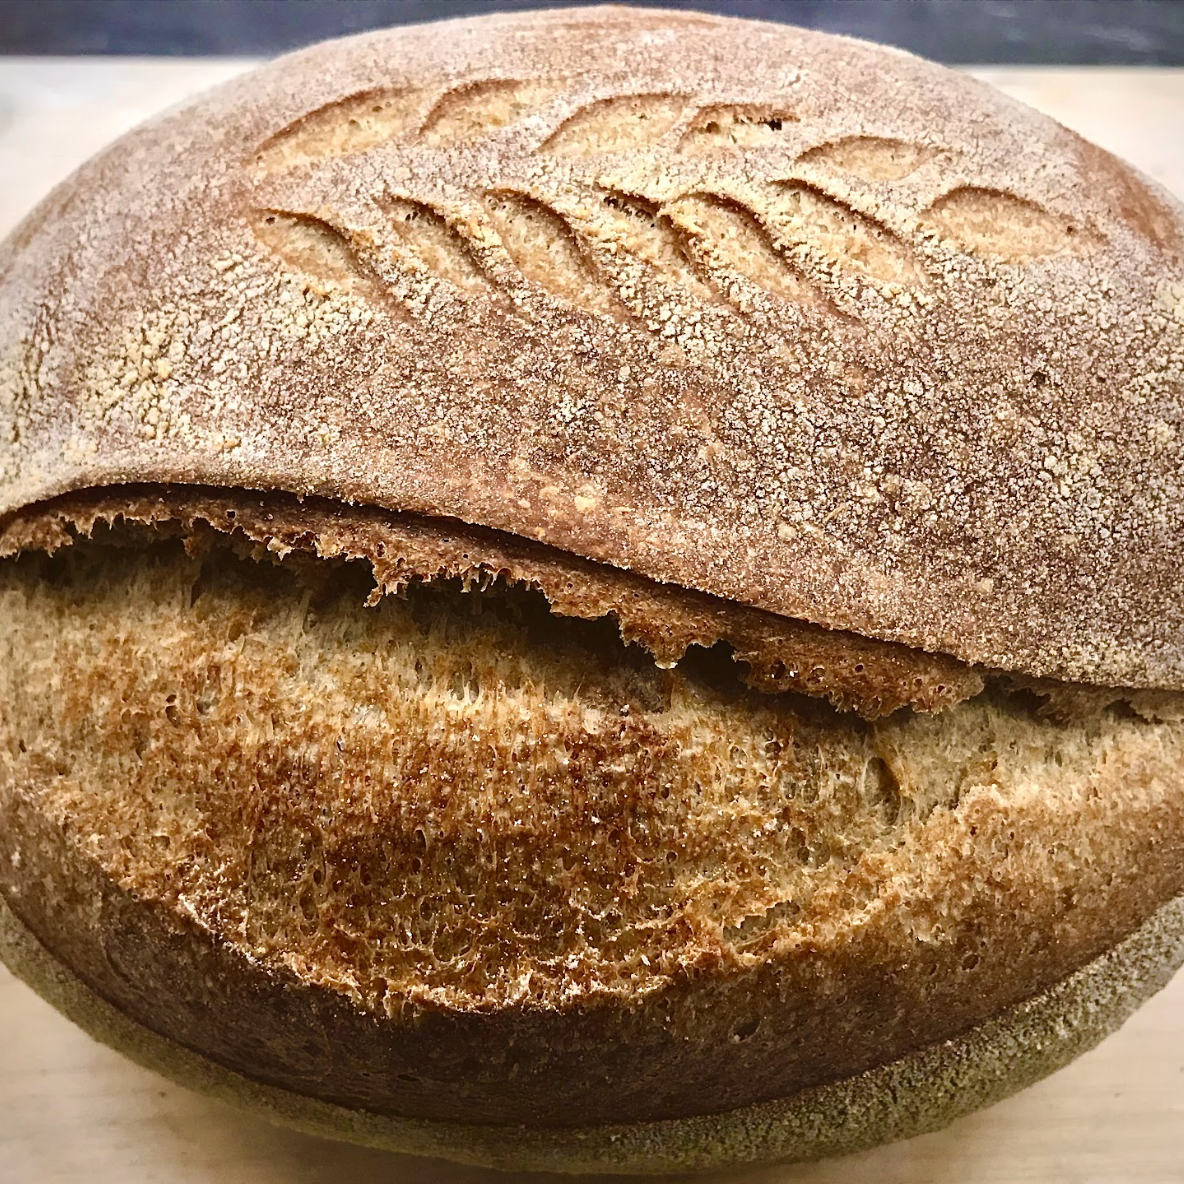 <h4>Bread</h4>
Every day Breads are Whole Wheat Loaf, Anadama Loaf, Multigrain Loaf, Country Sourdough Boule, Pain de Mie Loaf & Baguettes. 
Bread special is Plain Challah, Sesame Challah, Parker House Rolls, Semolina, Rosemary Focaccia